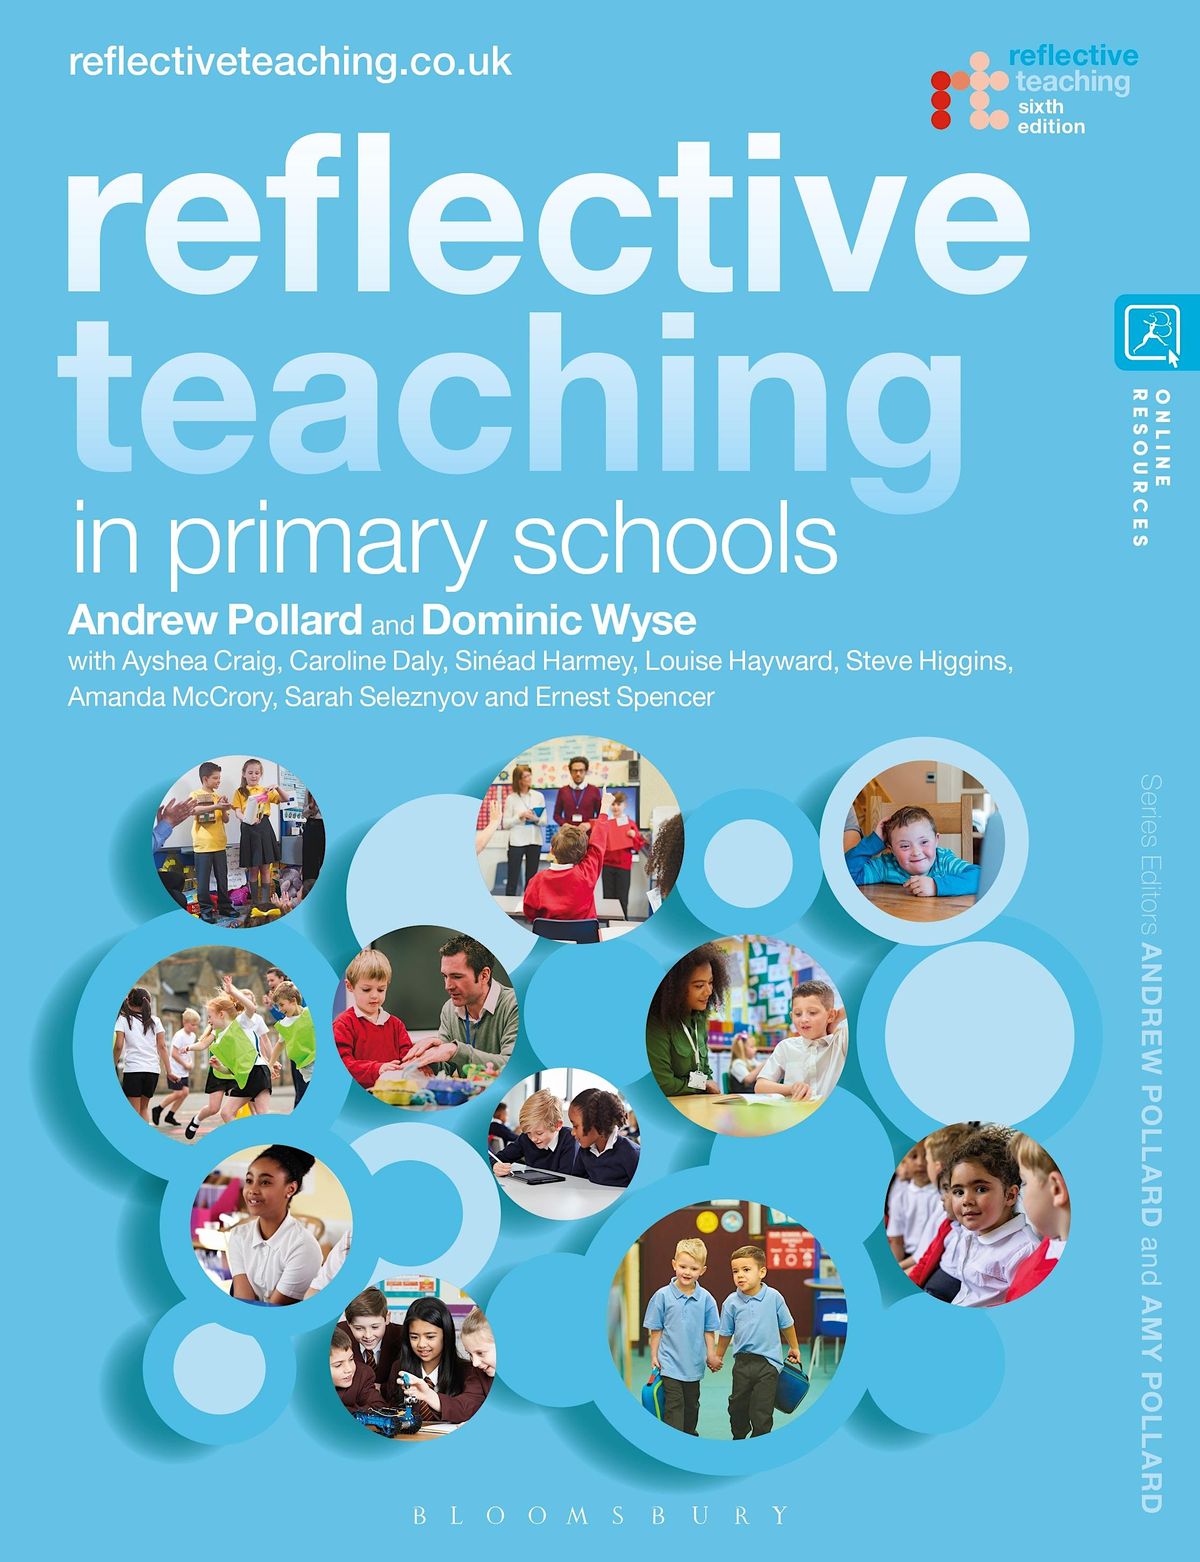 Reflective Teaching, Evidence, and Control of Teacher Education